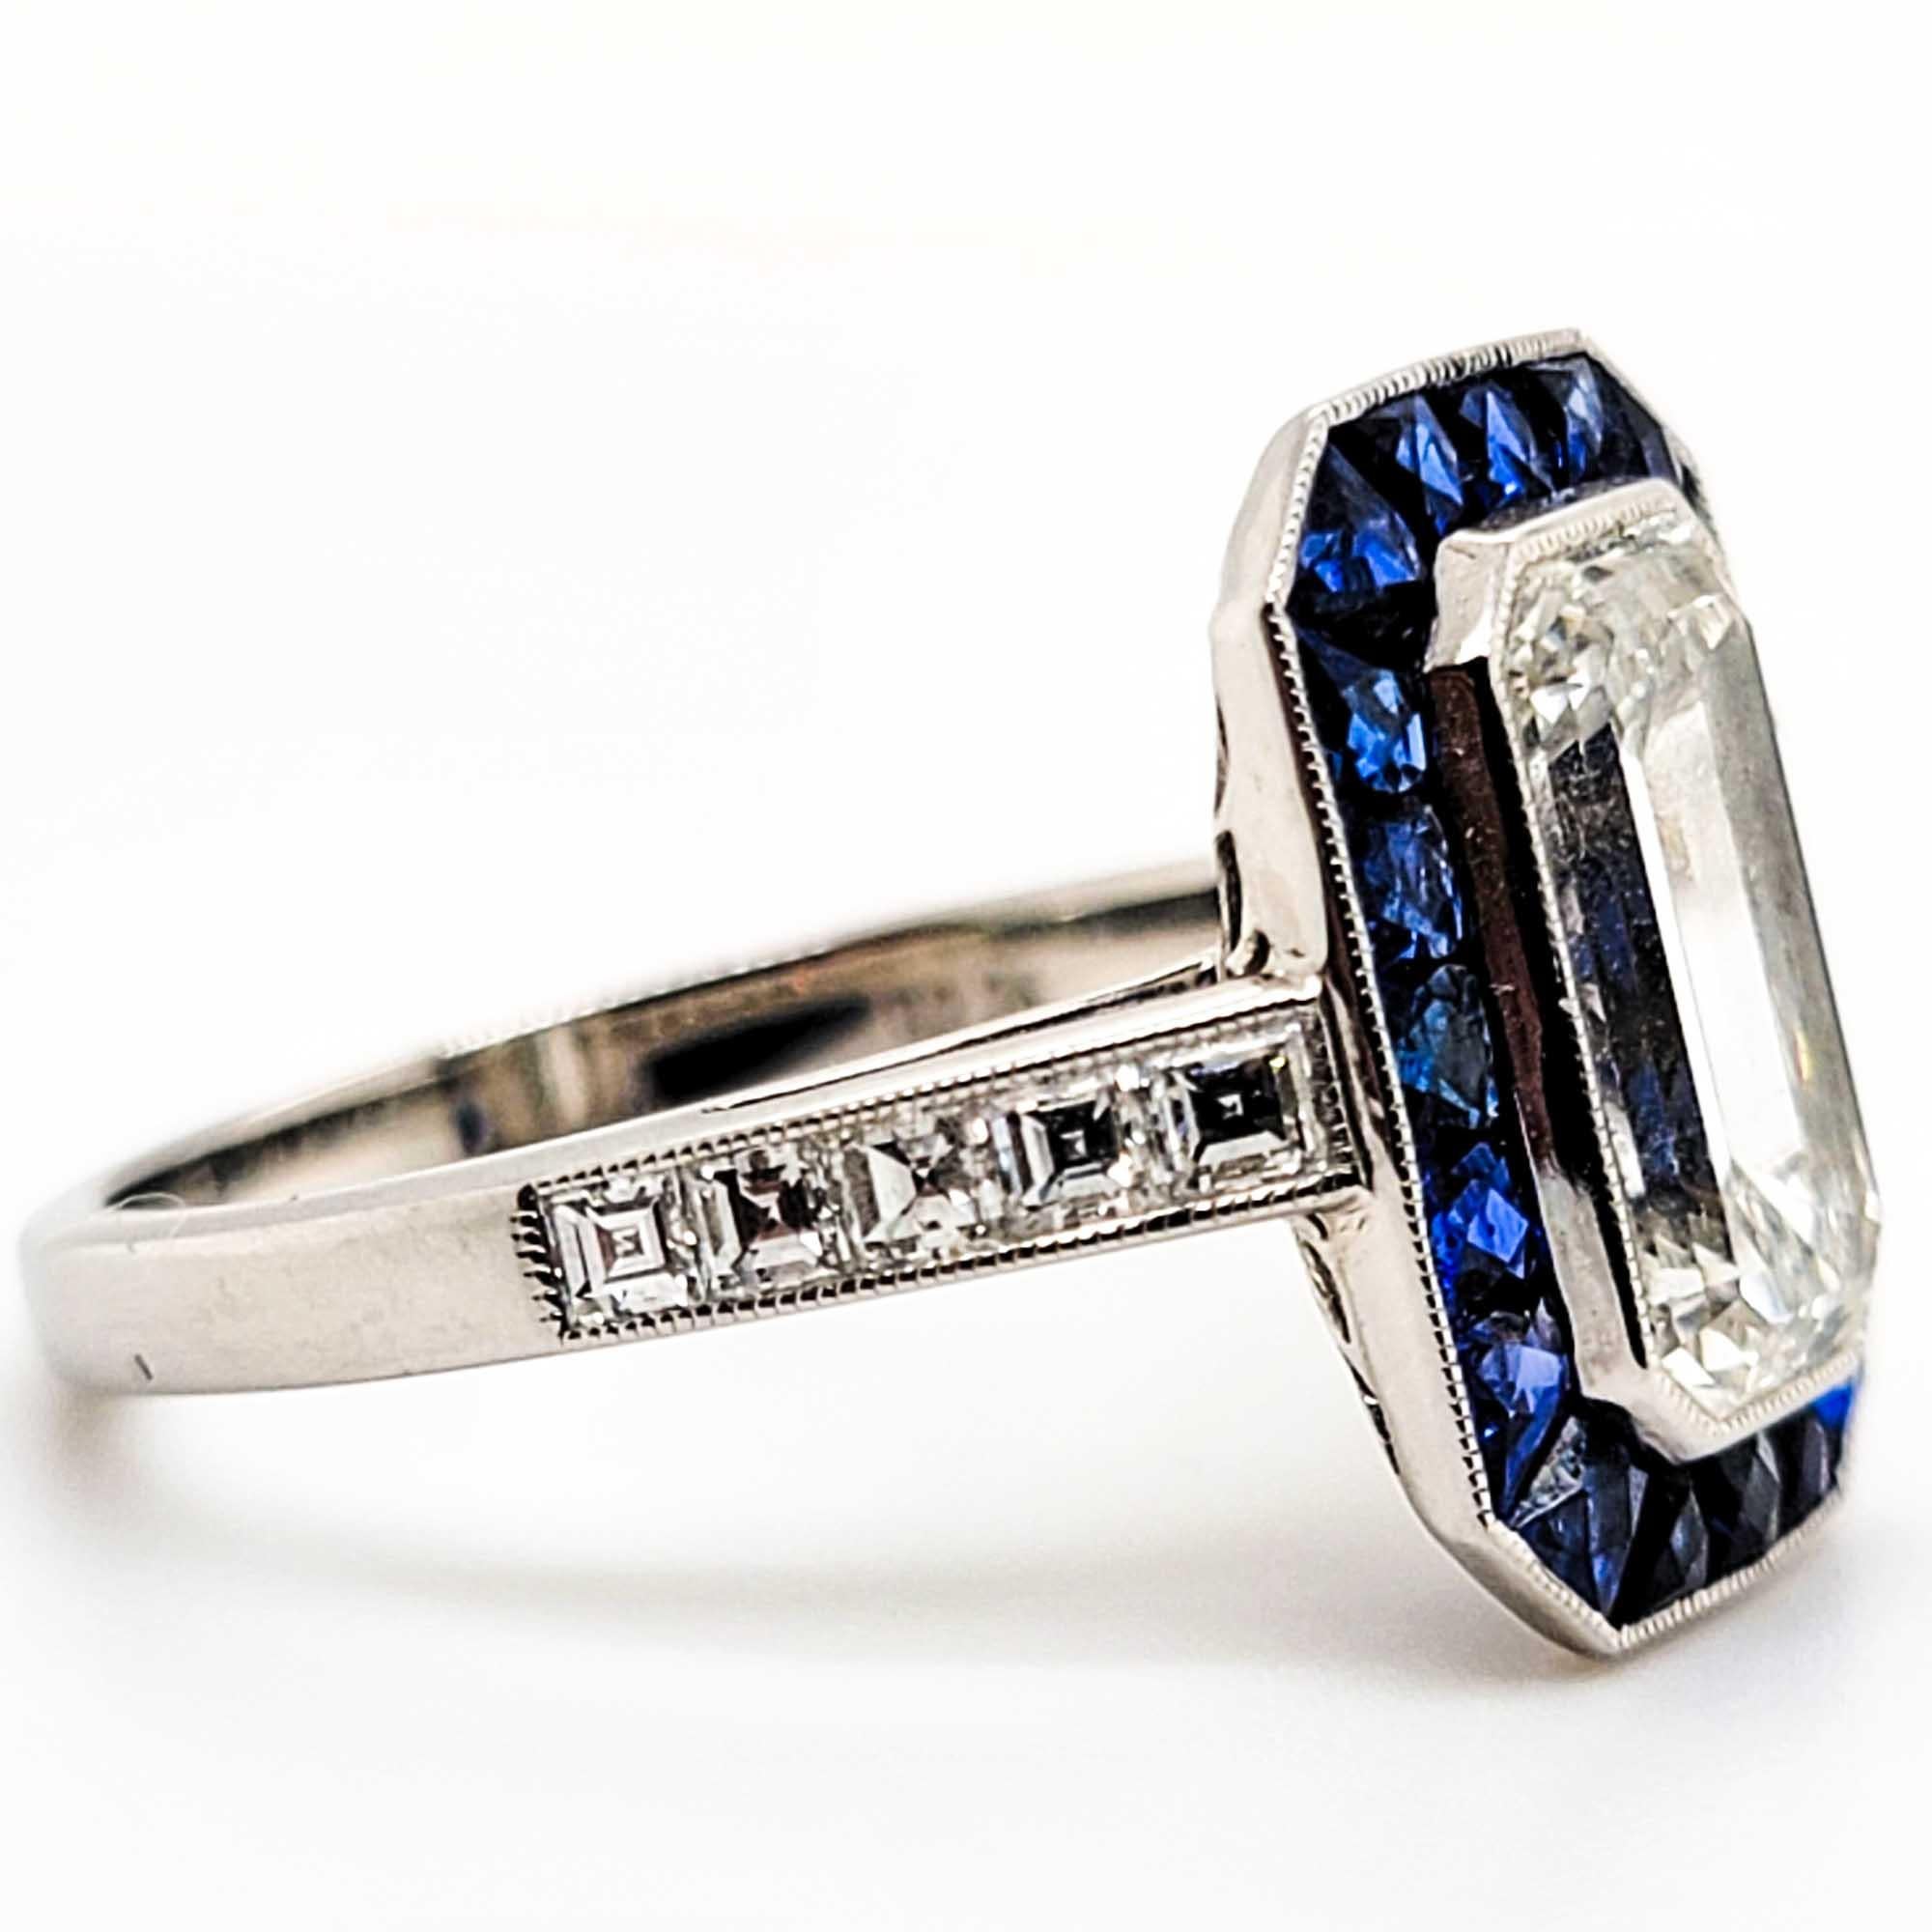 Elegant platinum GIA certified2.26 carat center emerald cut diamond with a color and clarity of H-VVS1 surrounded with sapphire weighing 1.10 carats and diamonds weighing 0.35 carats ring.
